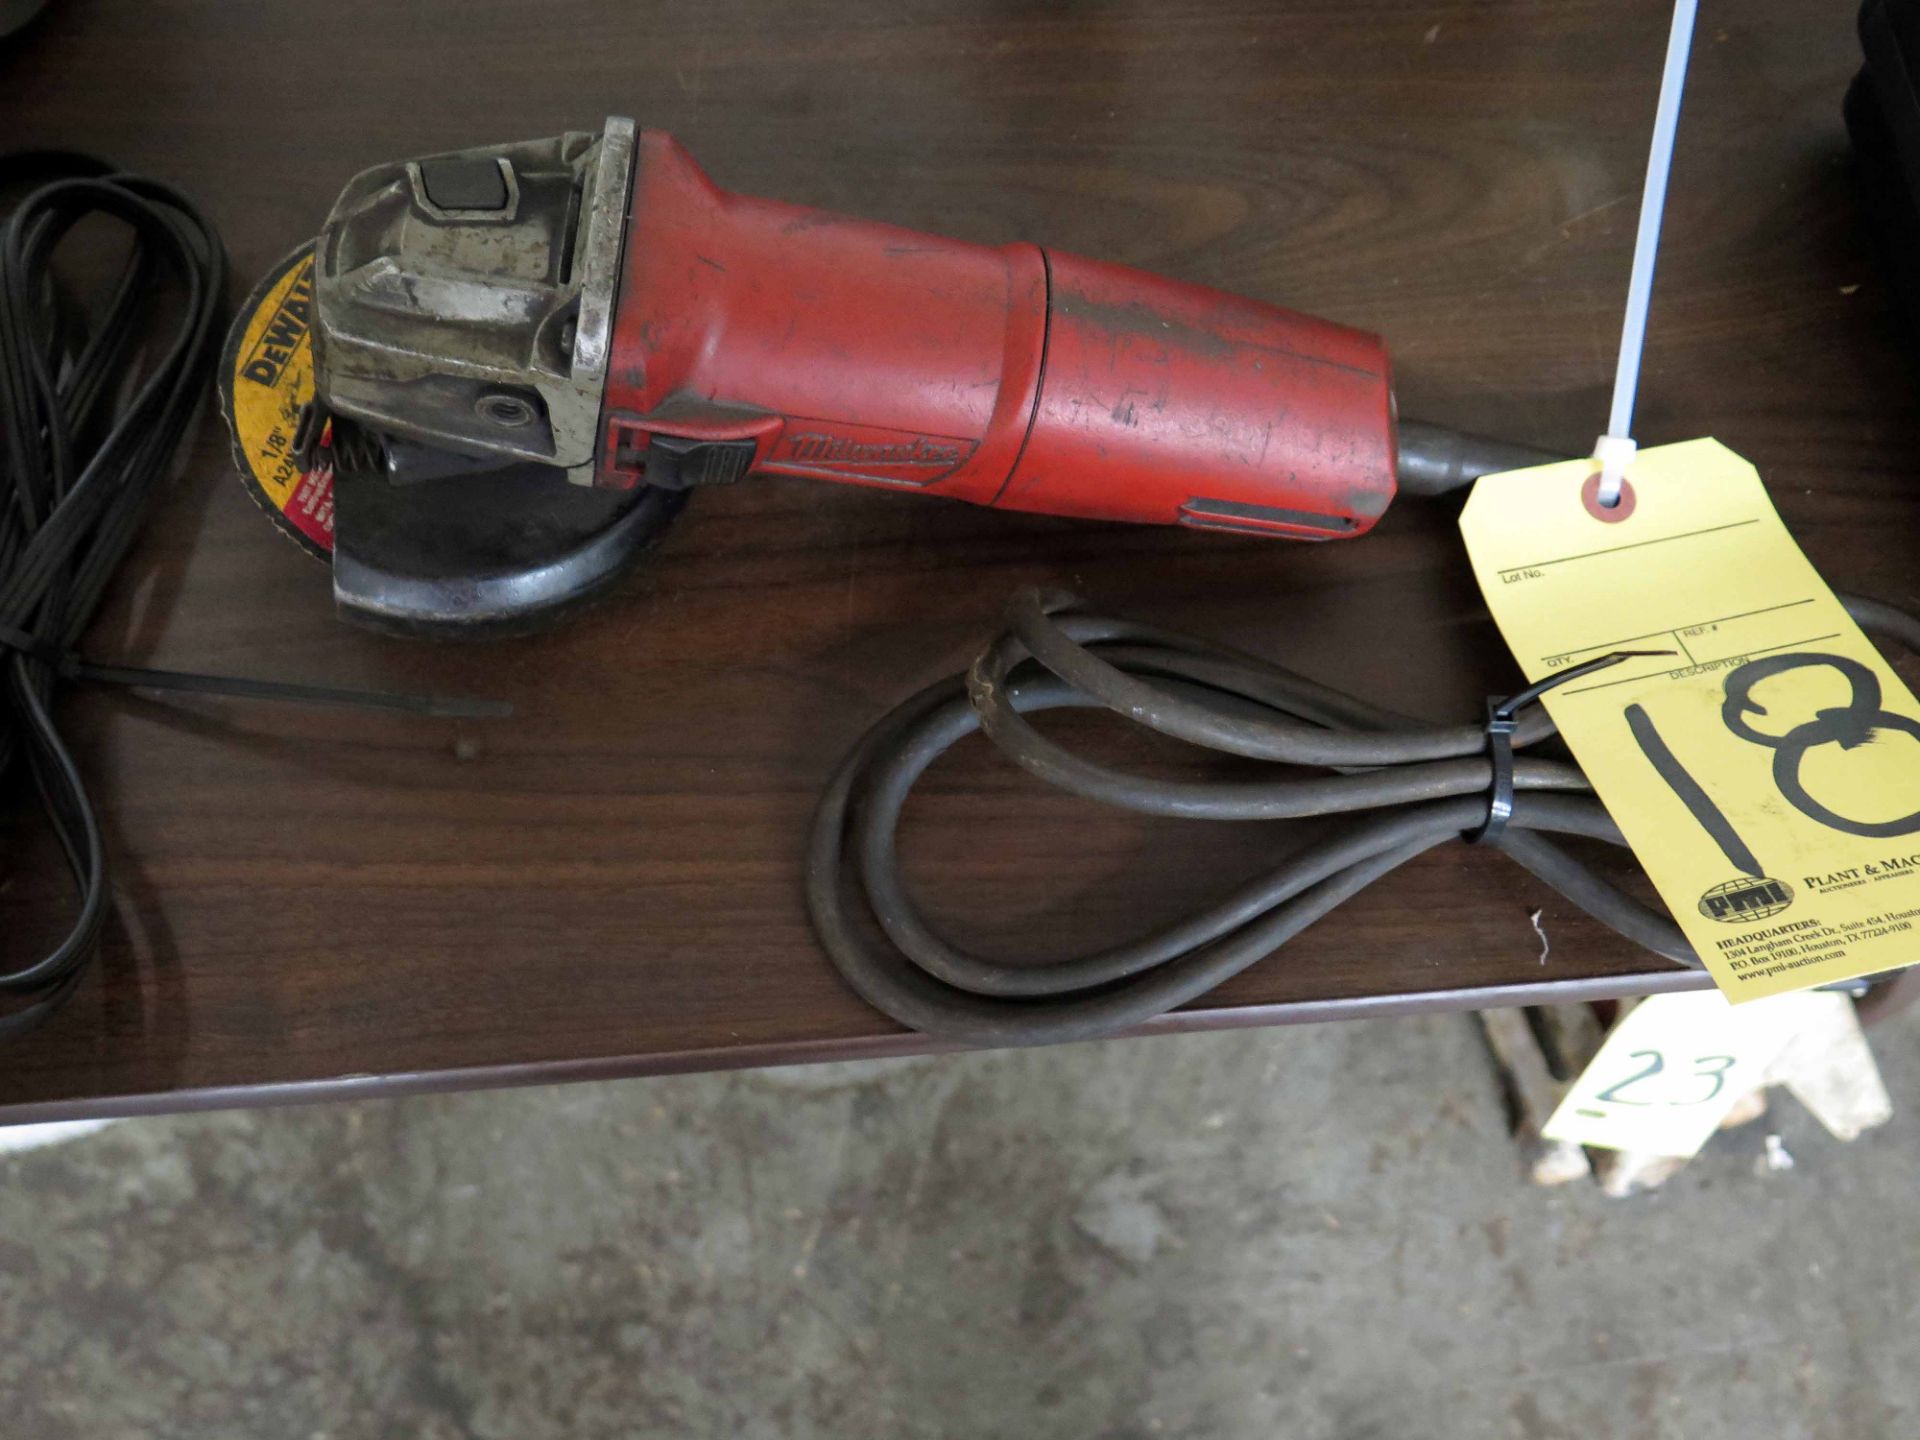 RIGHT ANGLE GRINDER, 4"